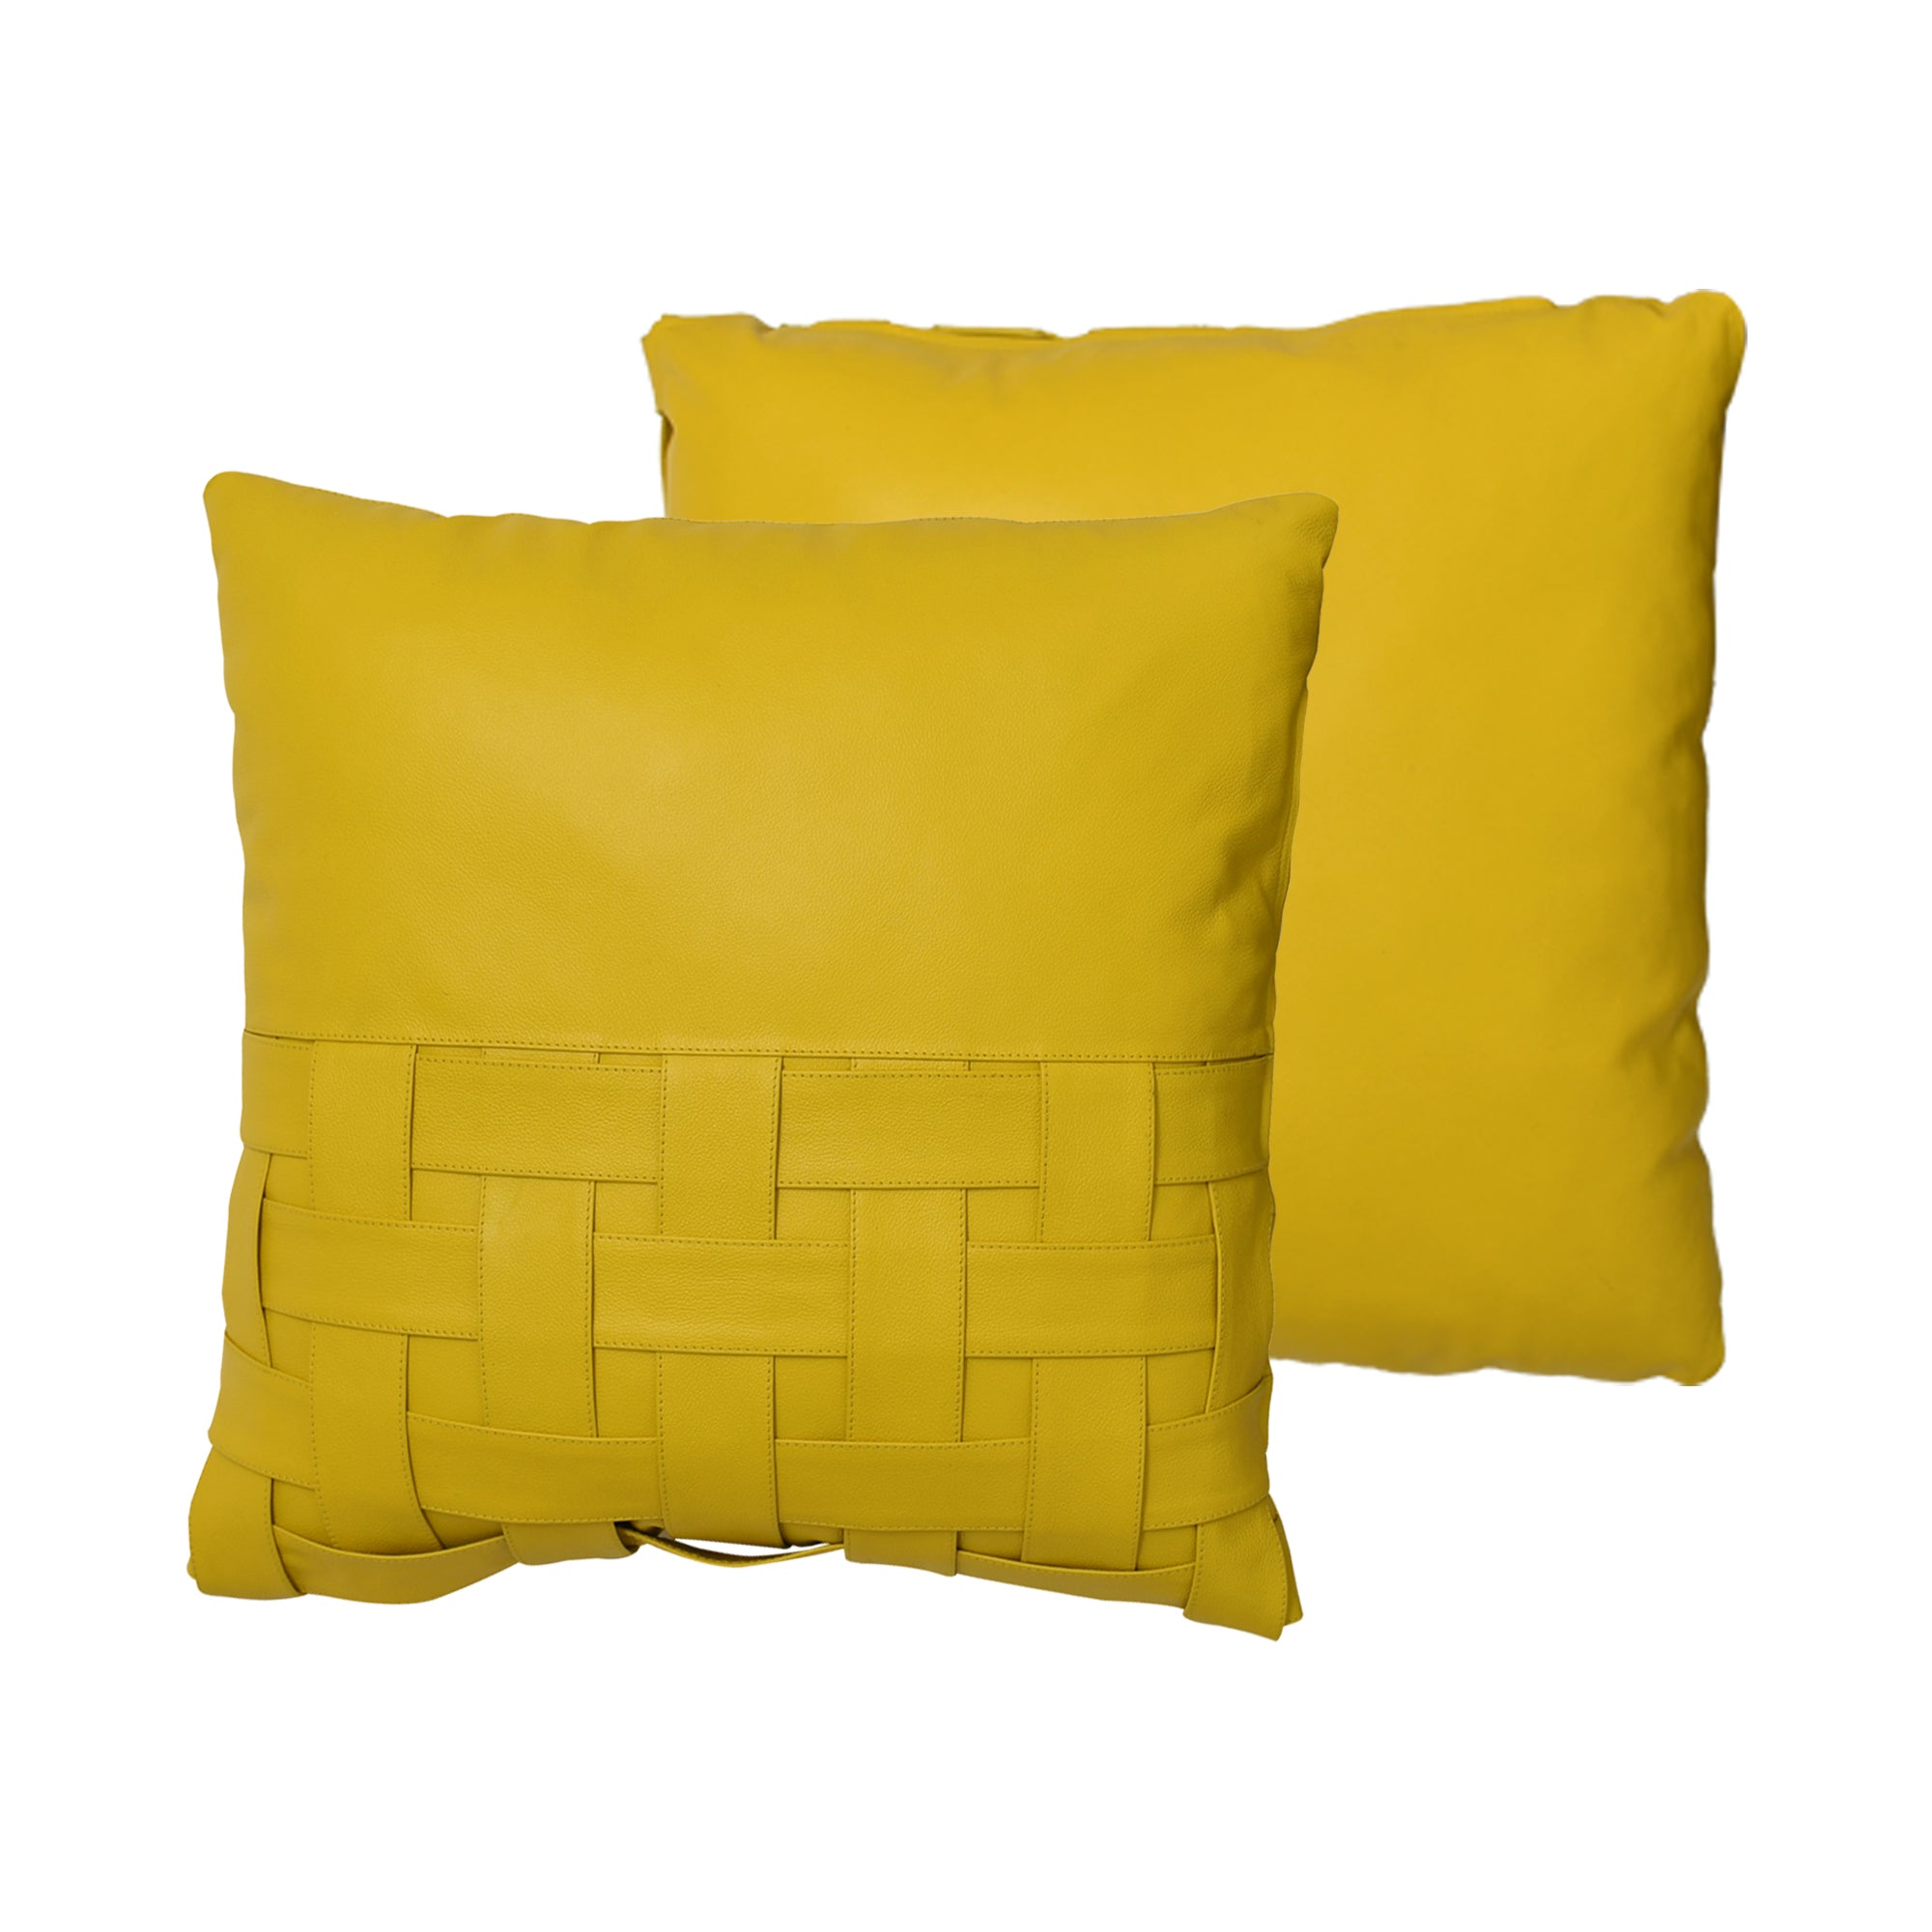 Yellow Leather Throw Pillows Front and Back